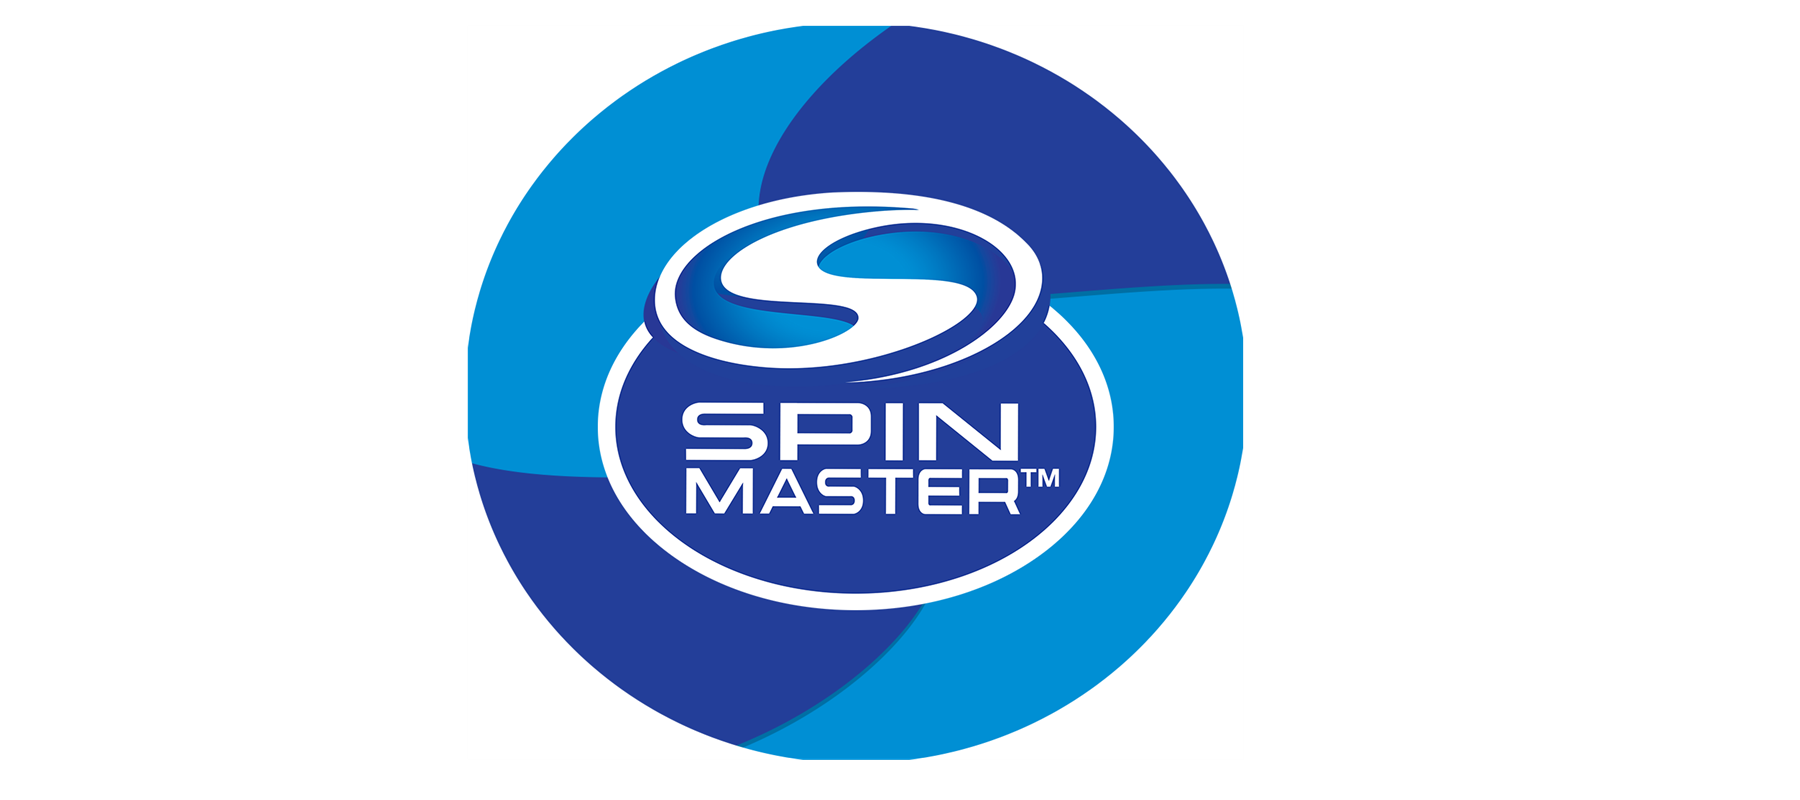 Global children's entertainment firm Spin Master launches marketing campaign to inspire problem solvers